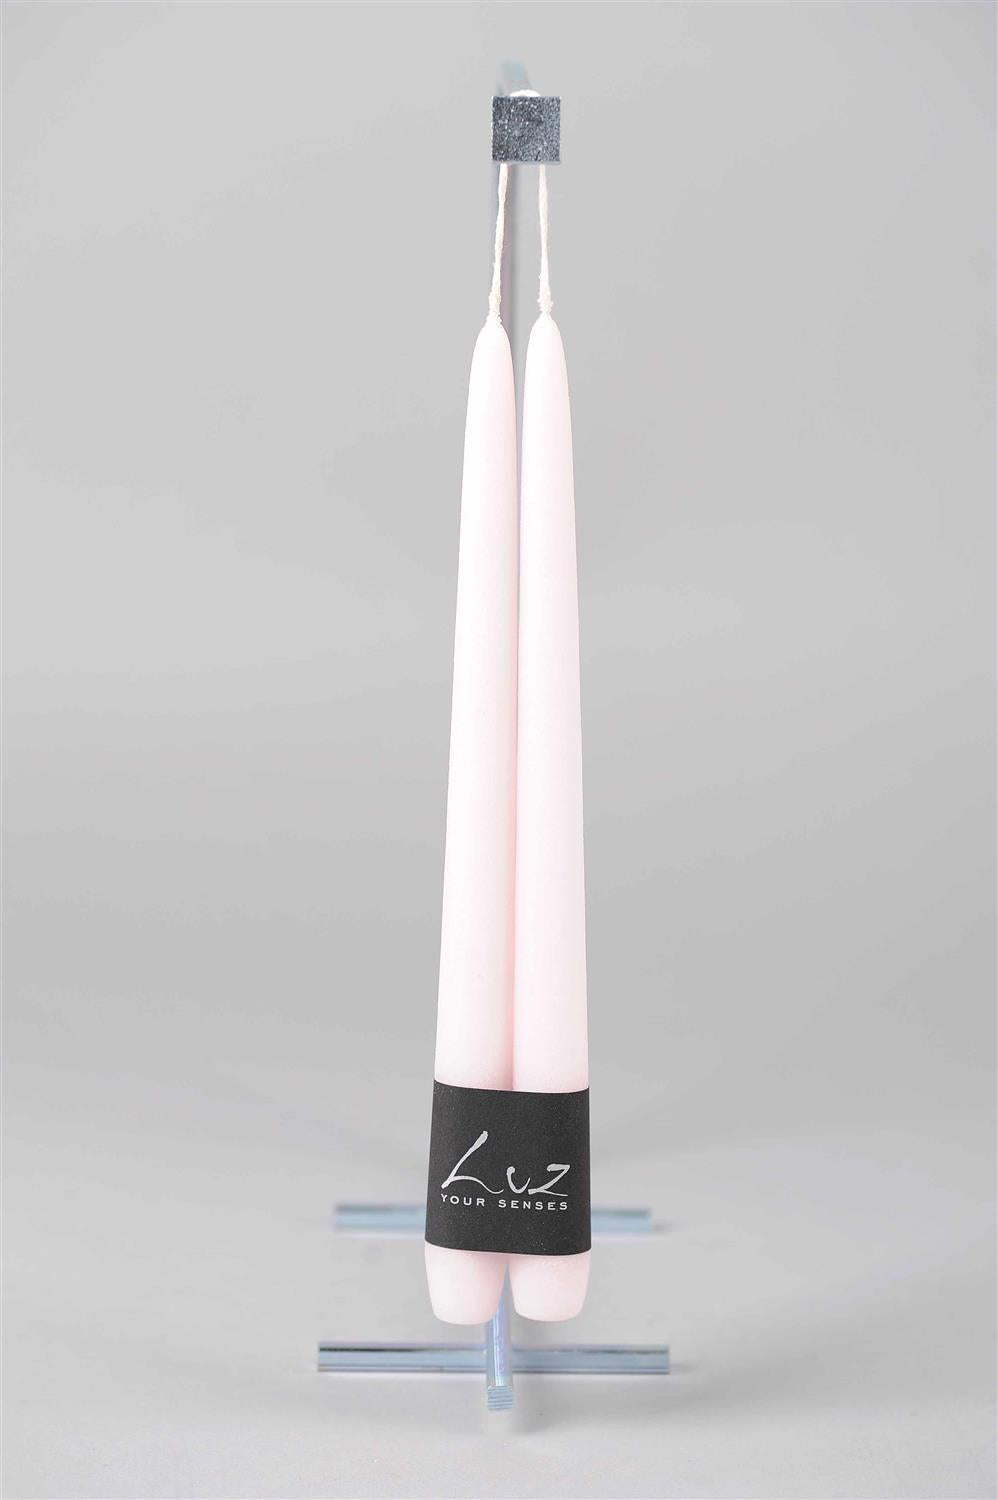 Velours - Pair of Tapers - Luz Your Senses - Strawberry Ice